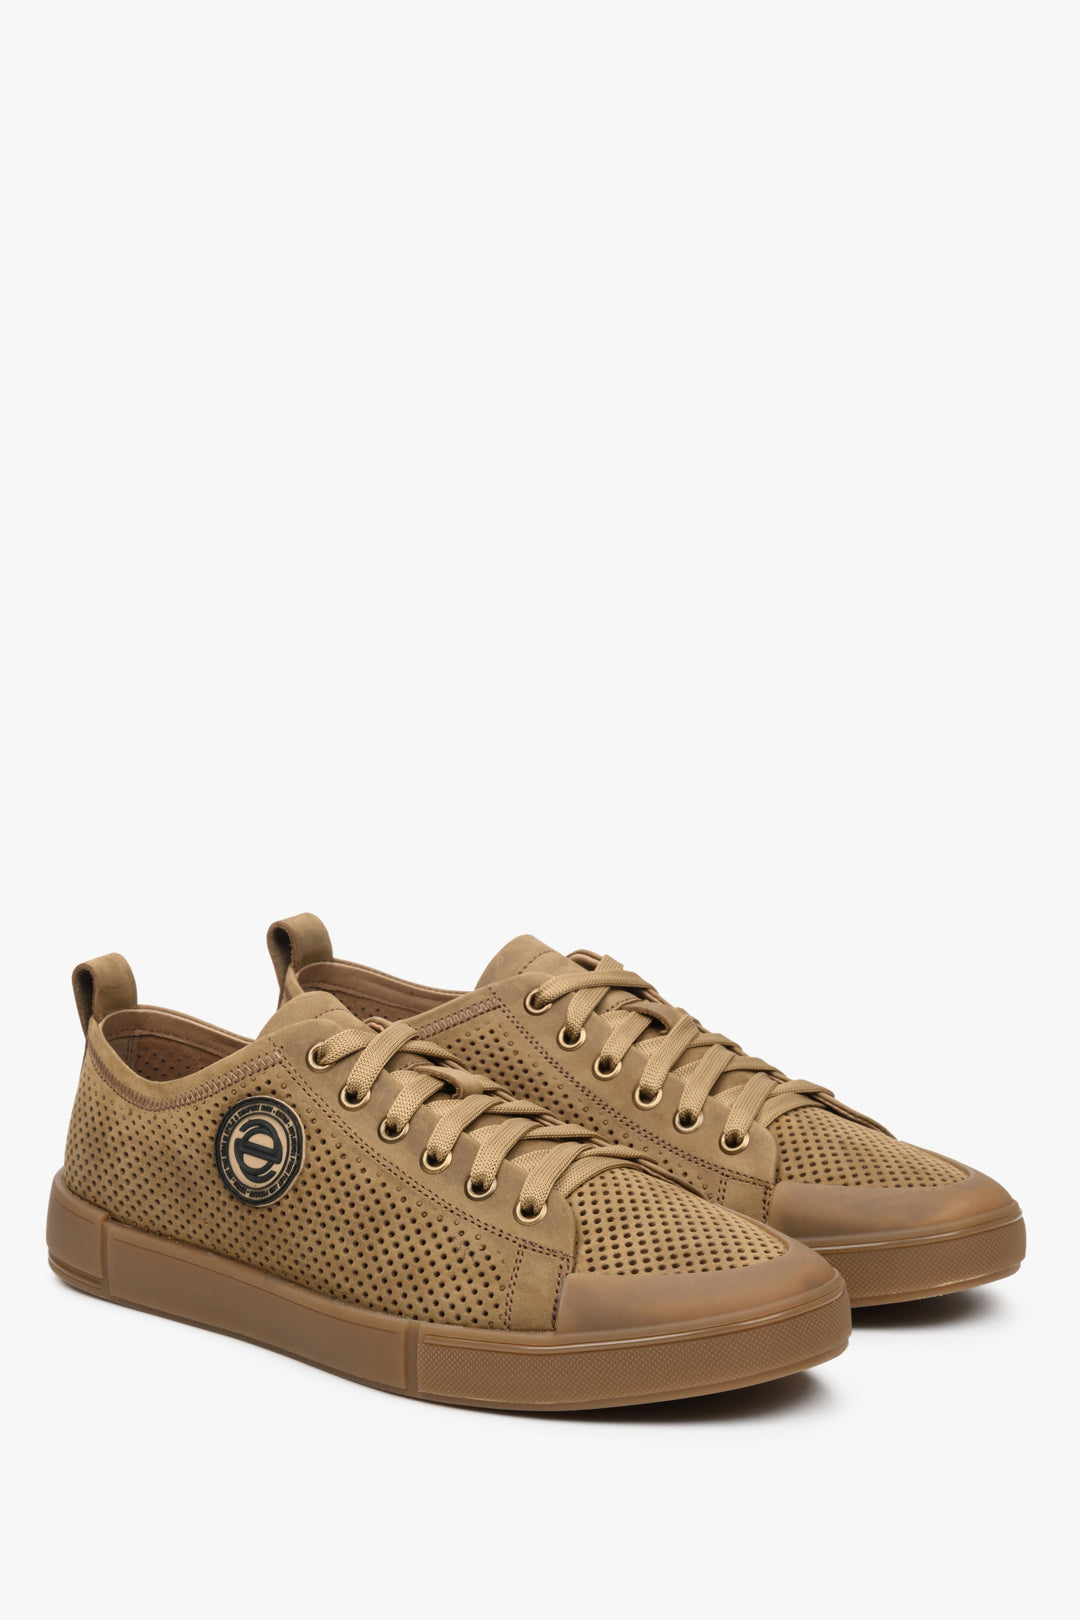 Men's brown sneakers with perforations by Estro - presentation of the side line and toe.